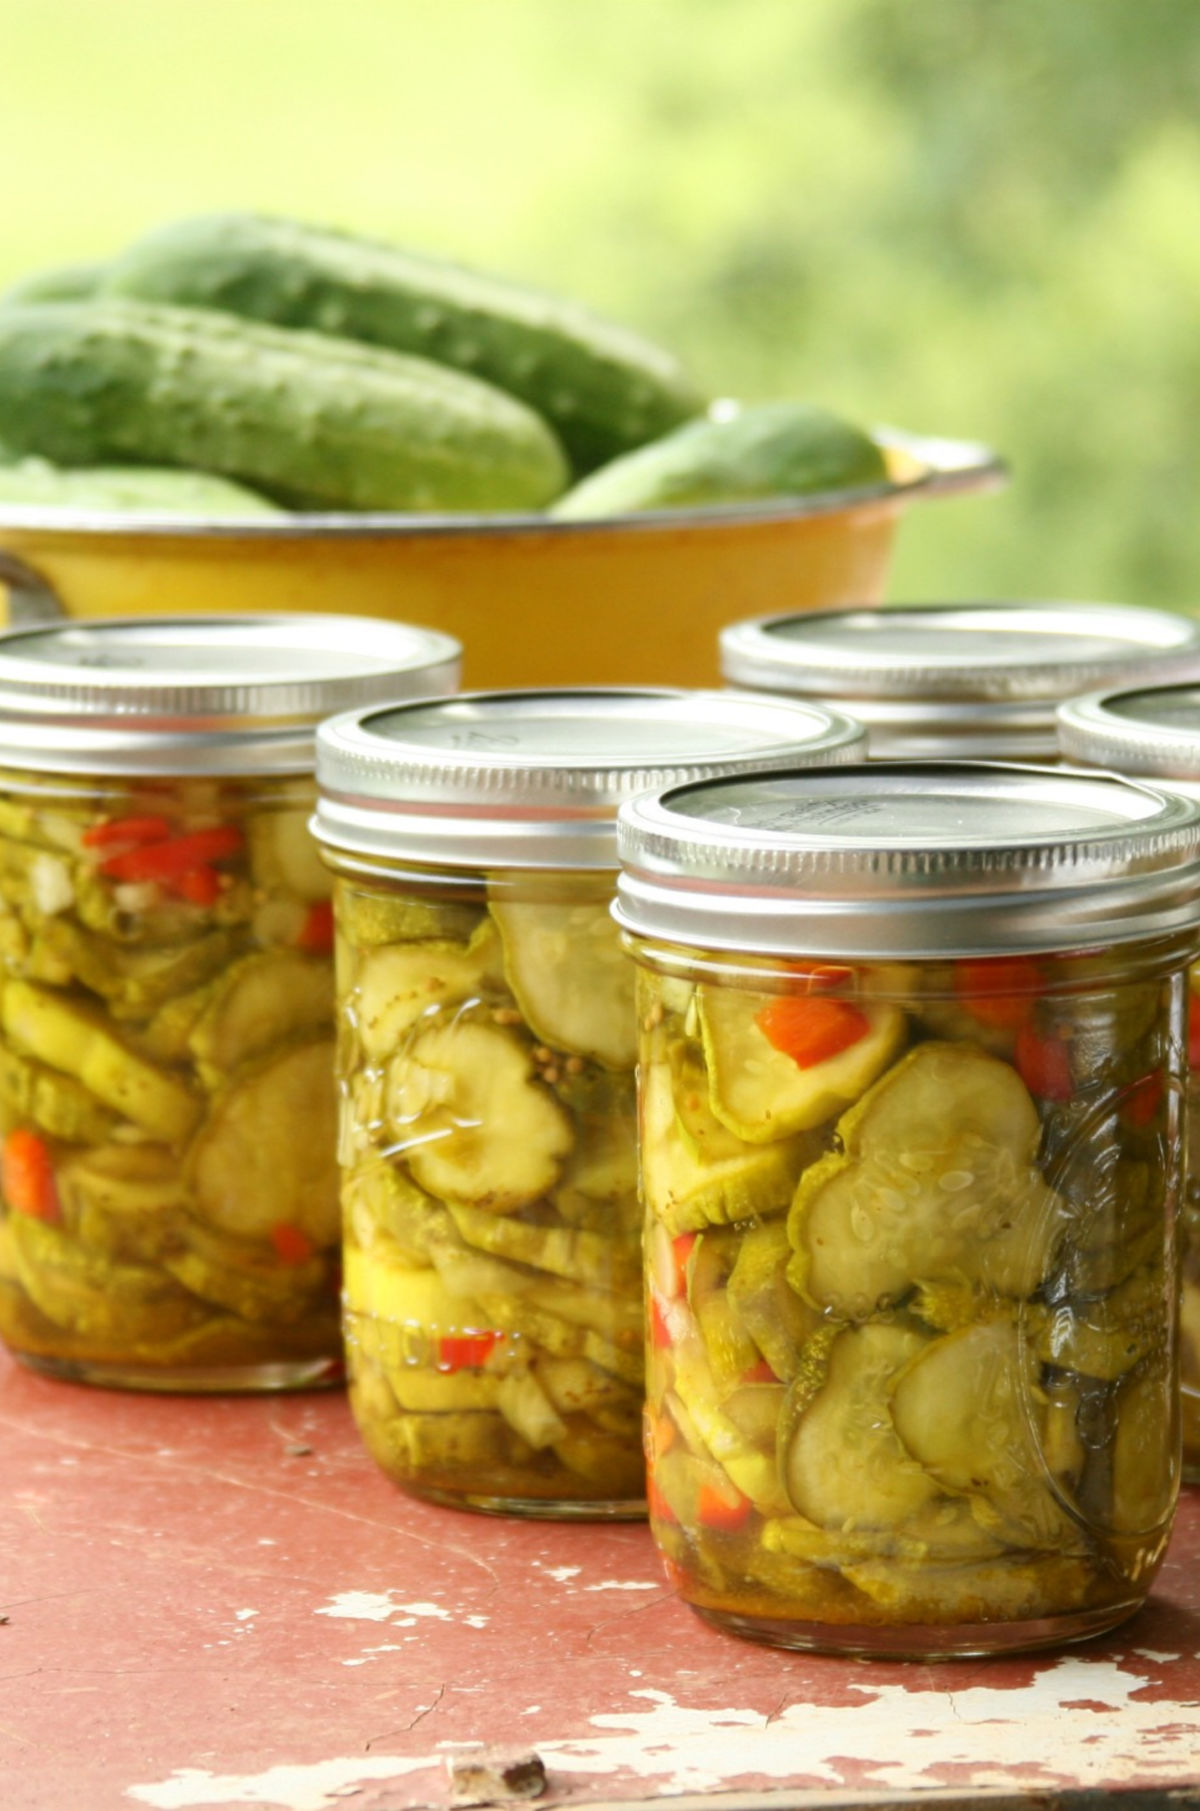 Bread and Butter pickles in Mason jars on barn red color metal.